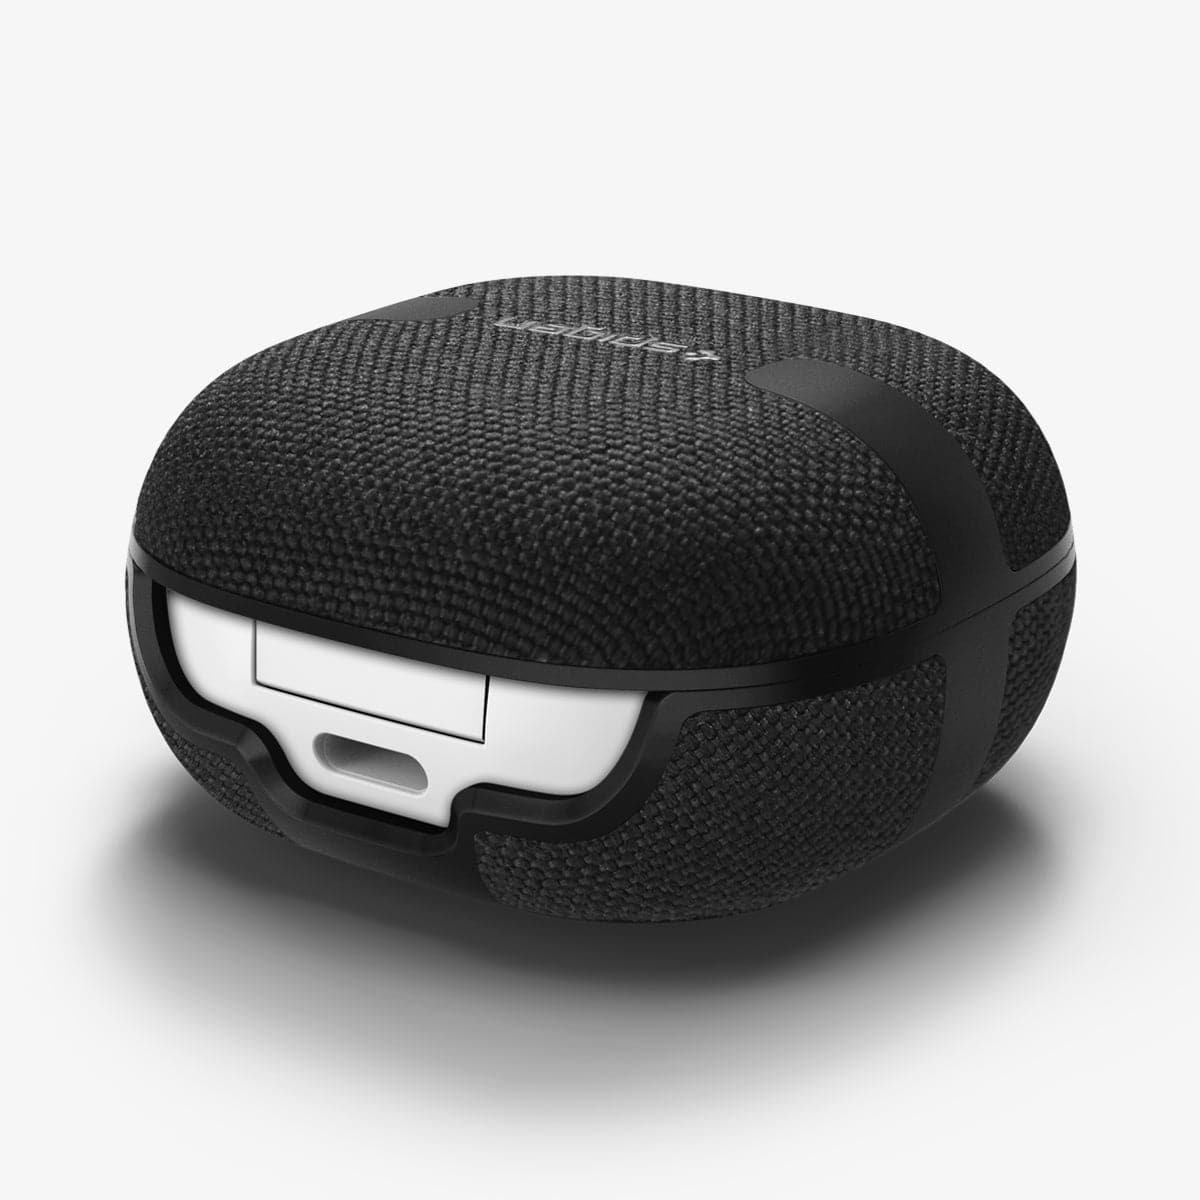 ASD01278 - Galaxy Buds 2 Pro / 2 / Pro / Live Case Urban Fit in black showing the back, side and top